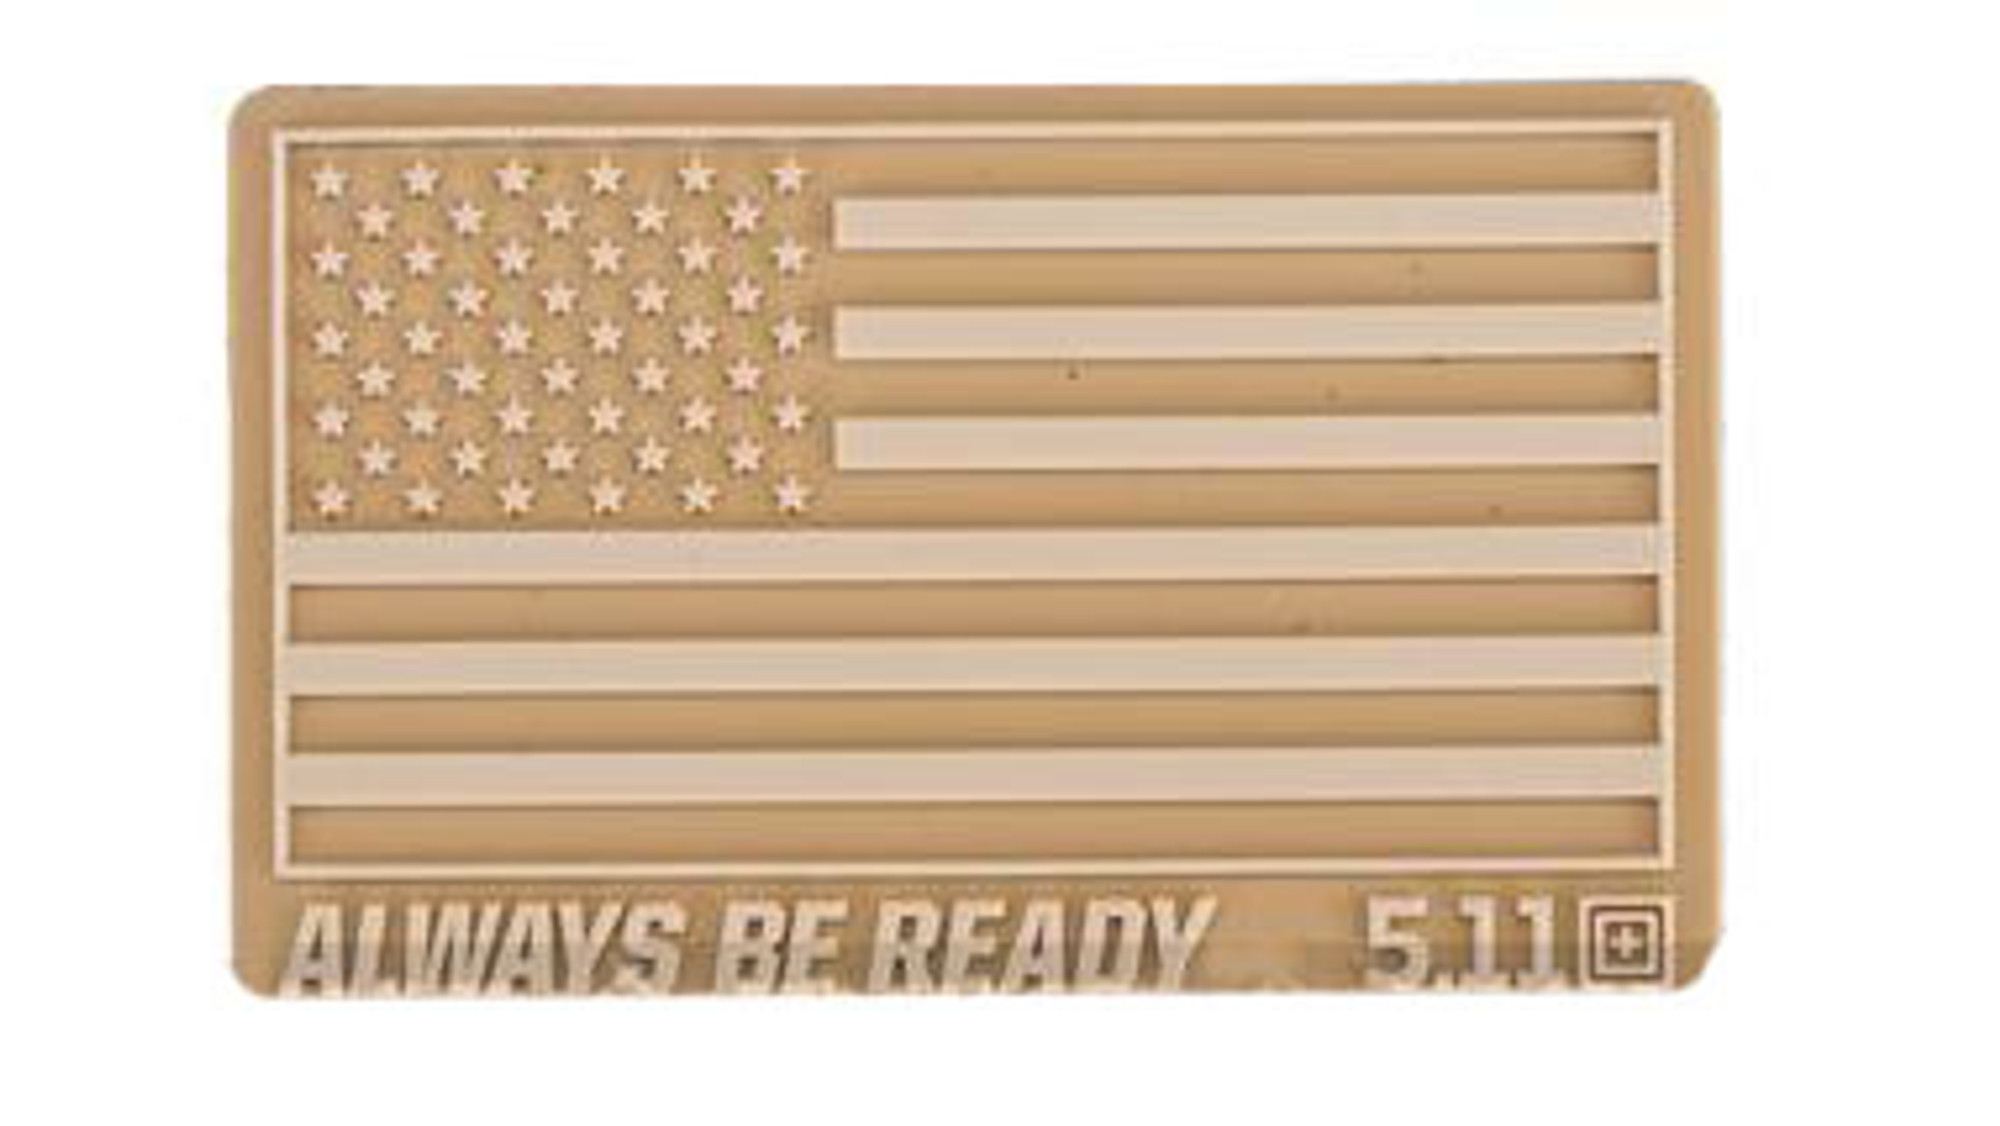 5.11 Tactical "US Flag - Always Be Ready" PVC Hook and Loop Morale Patch (Color: Sand)